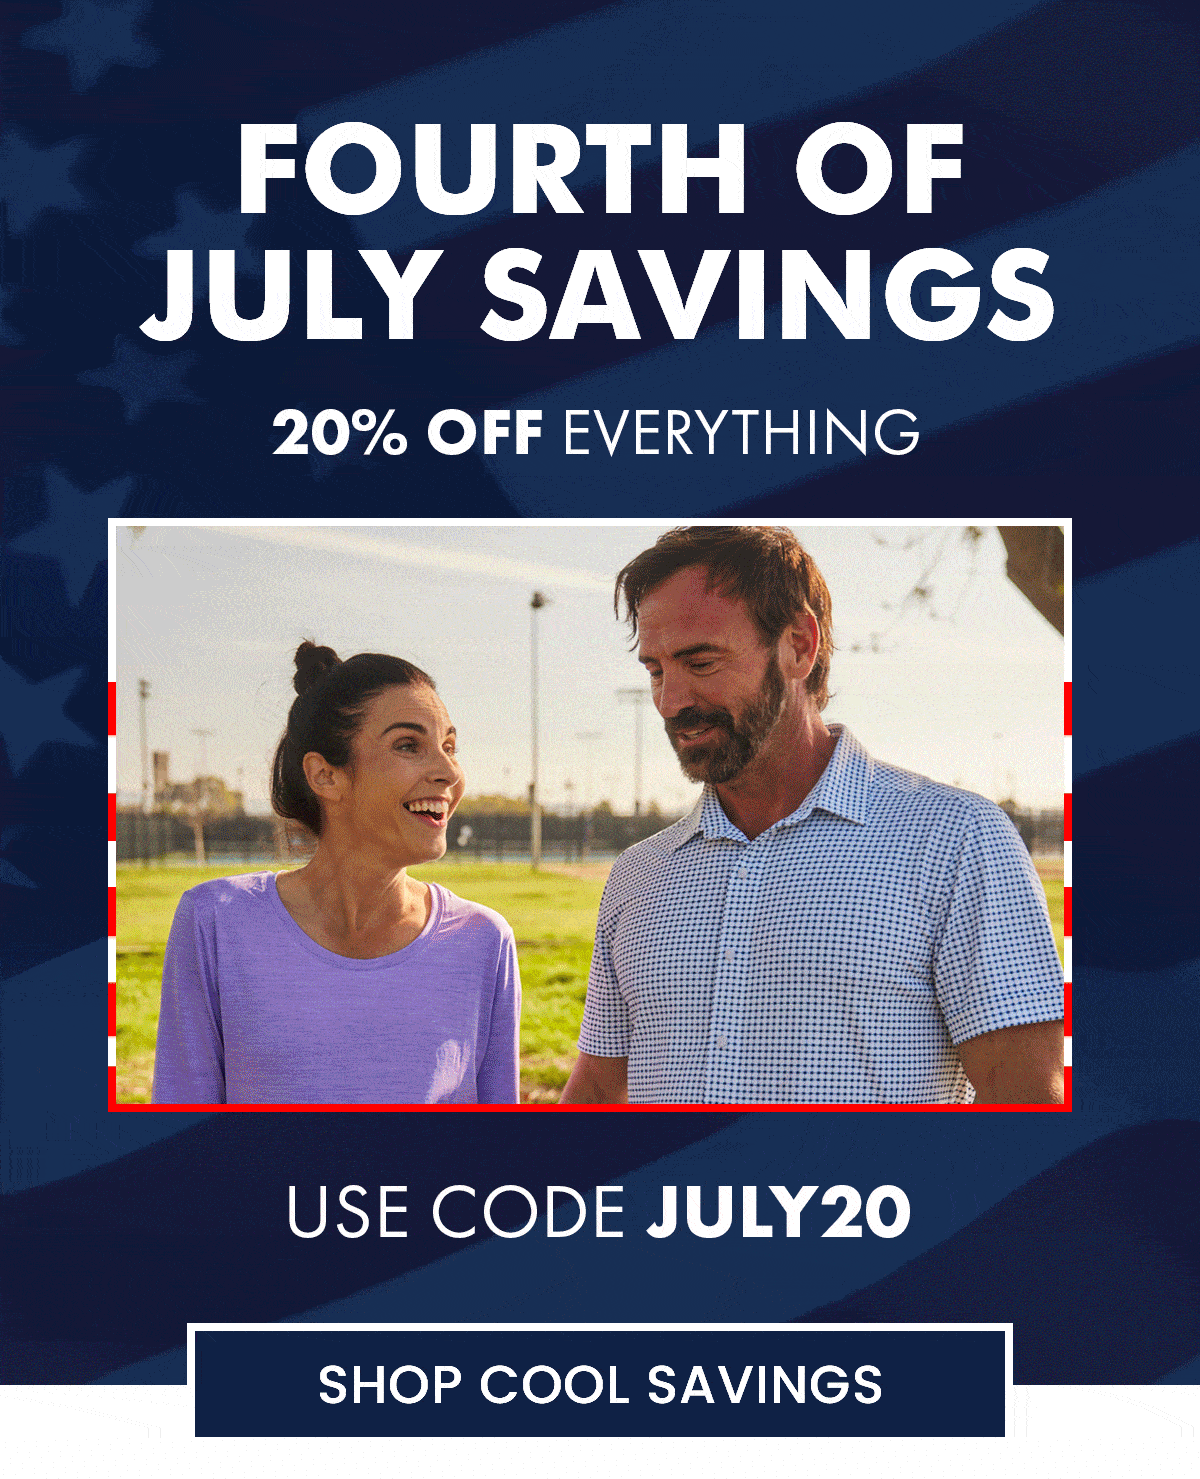 FOURTH OF JULY SAVINGS 20% OFF EVERYTHING USE CODE JULY20 SHOP COOL SAVINGS